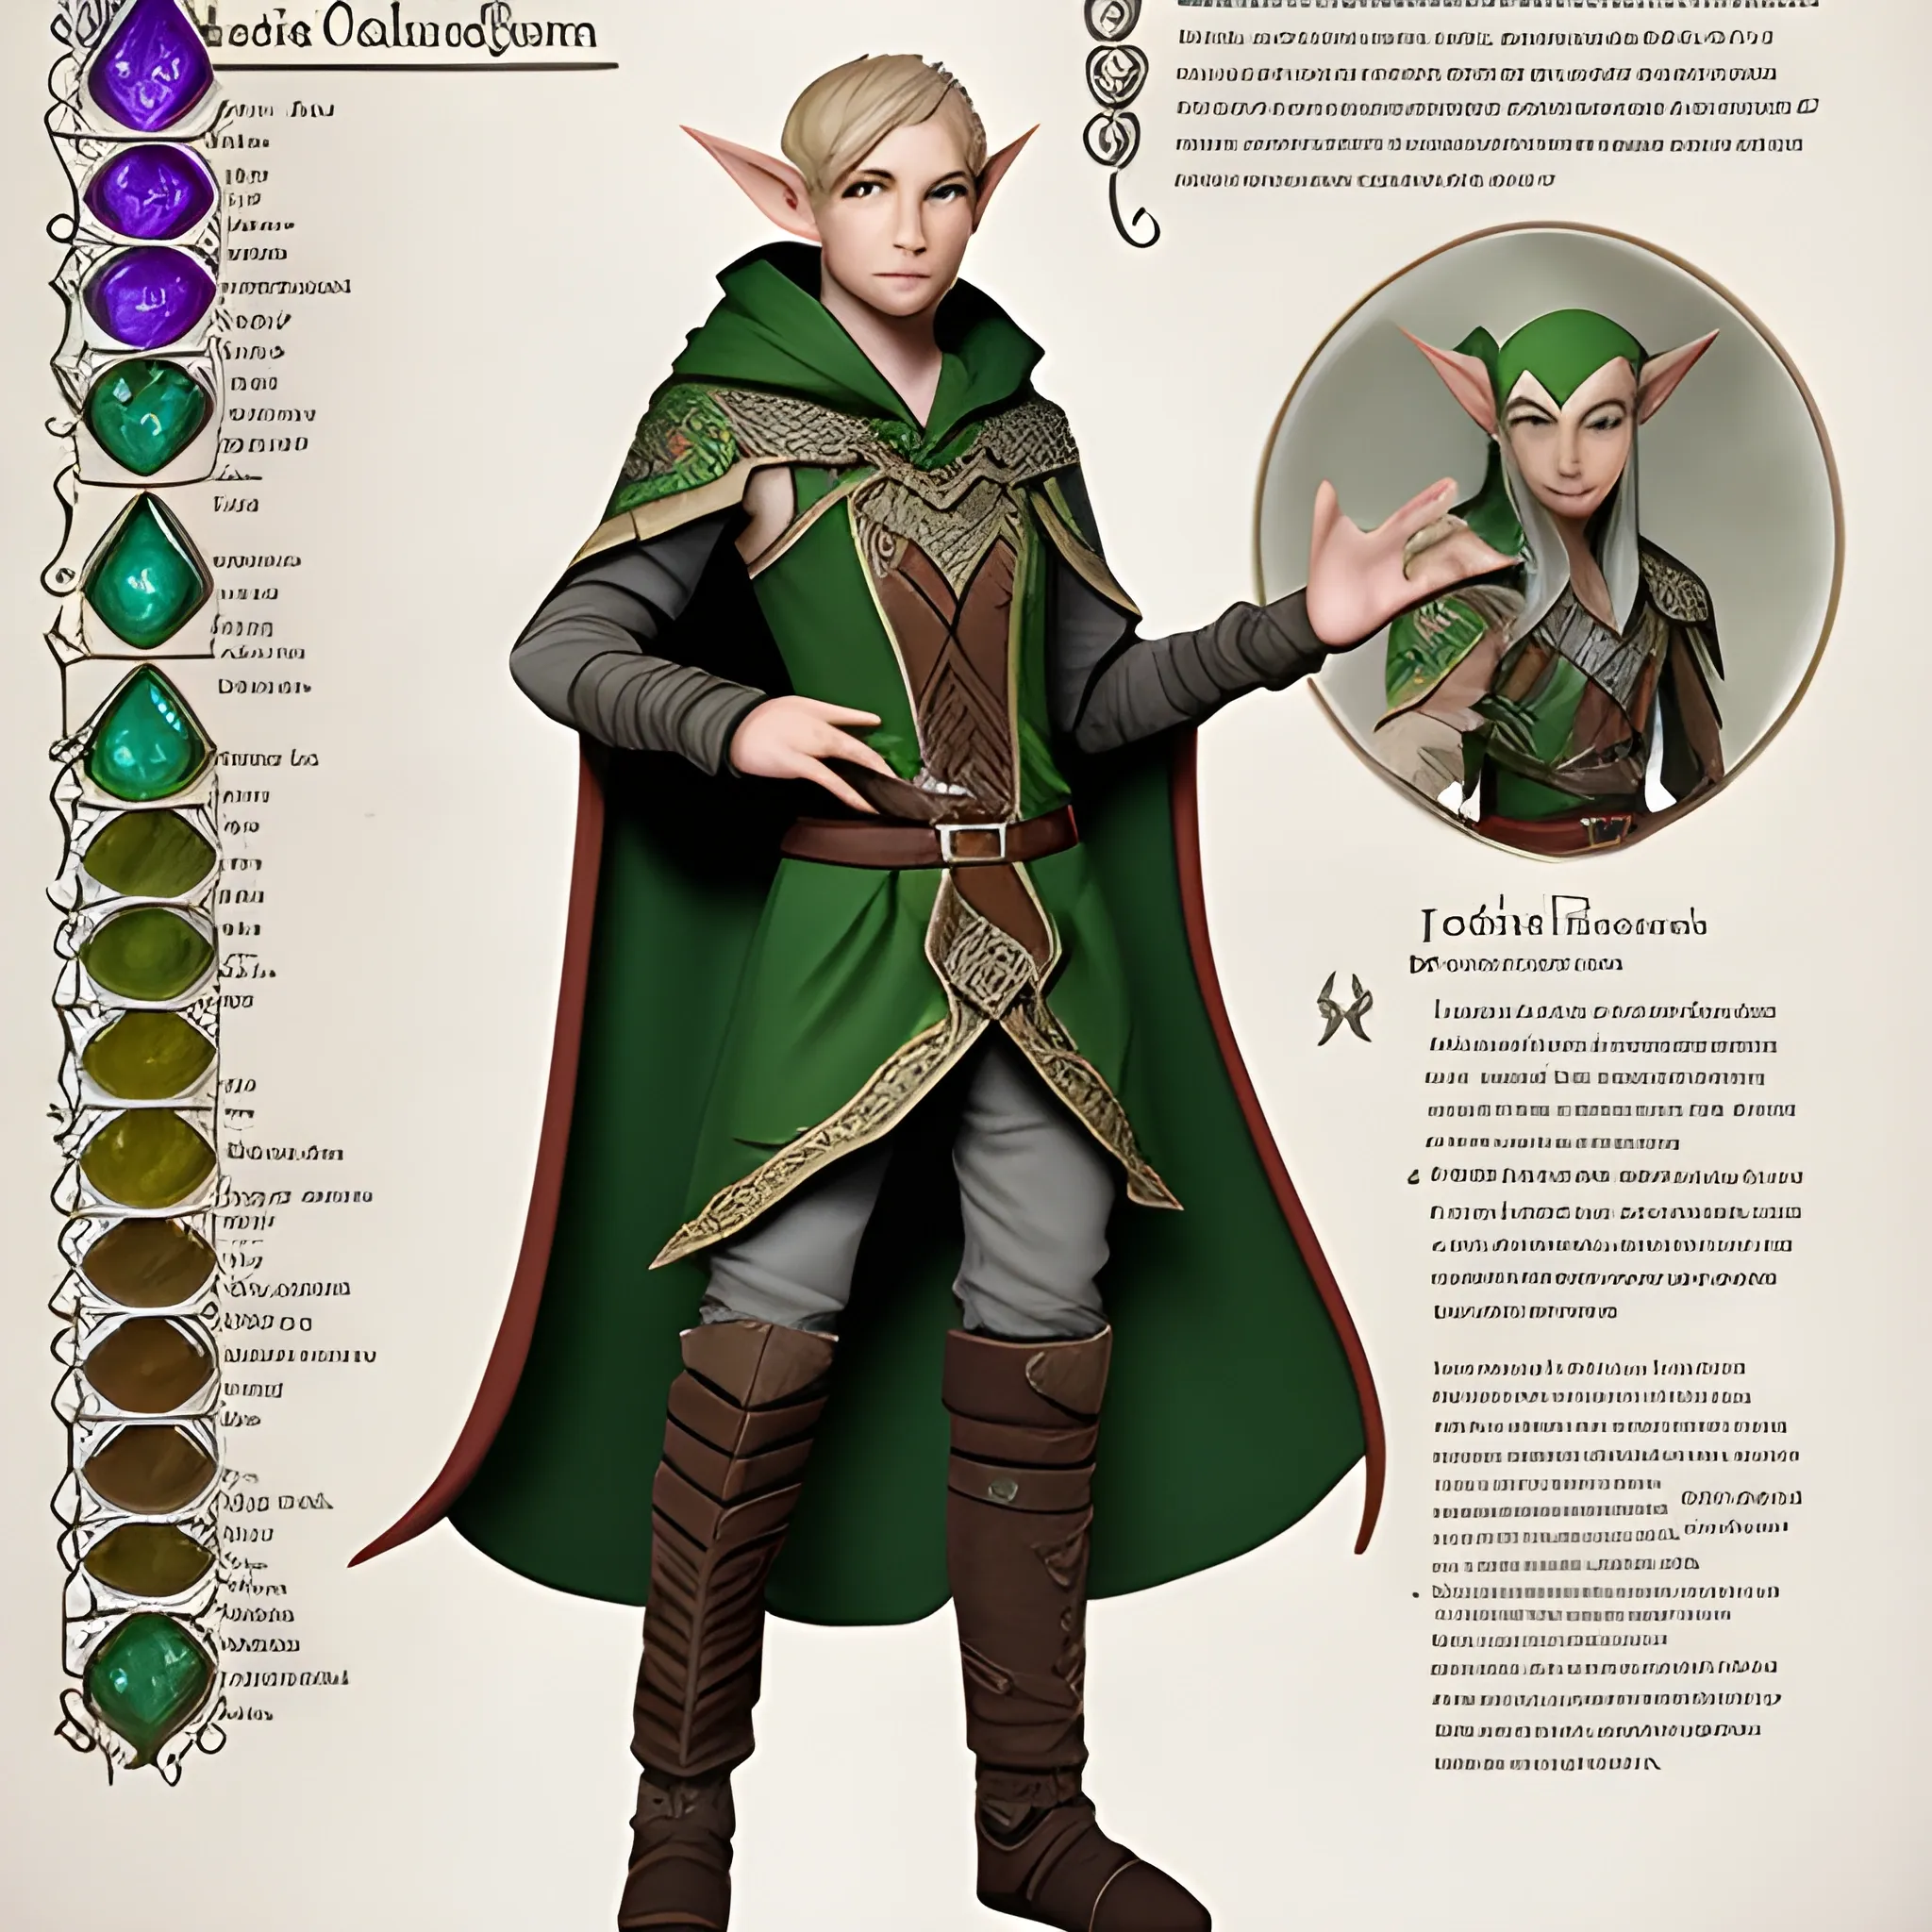 Create a dungeons and dragons character which is an Eladrin Elf male Wizard
